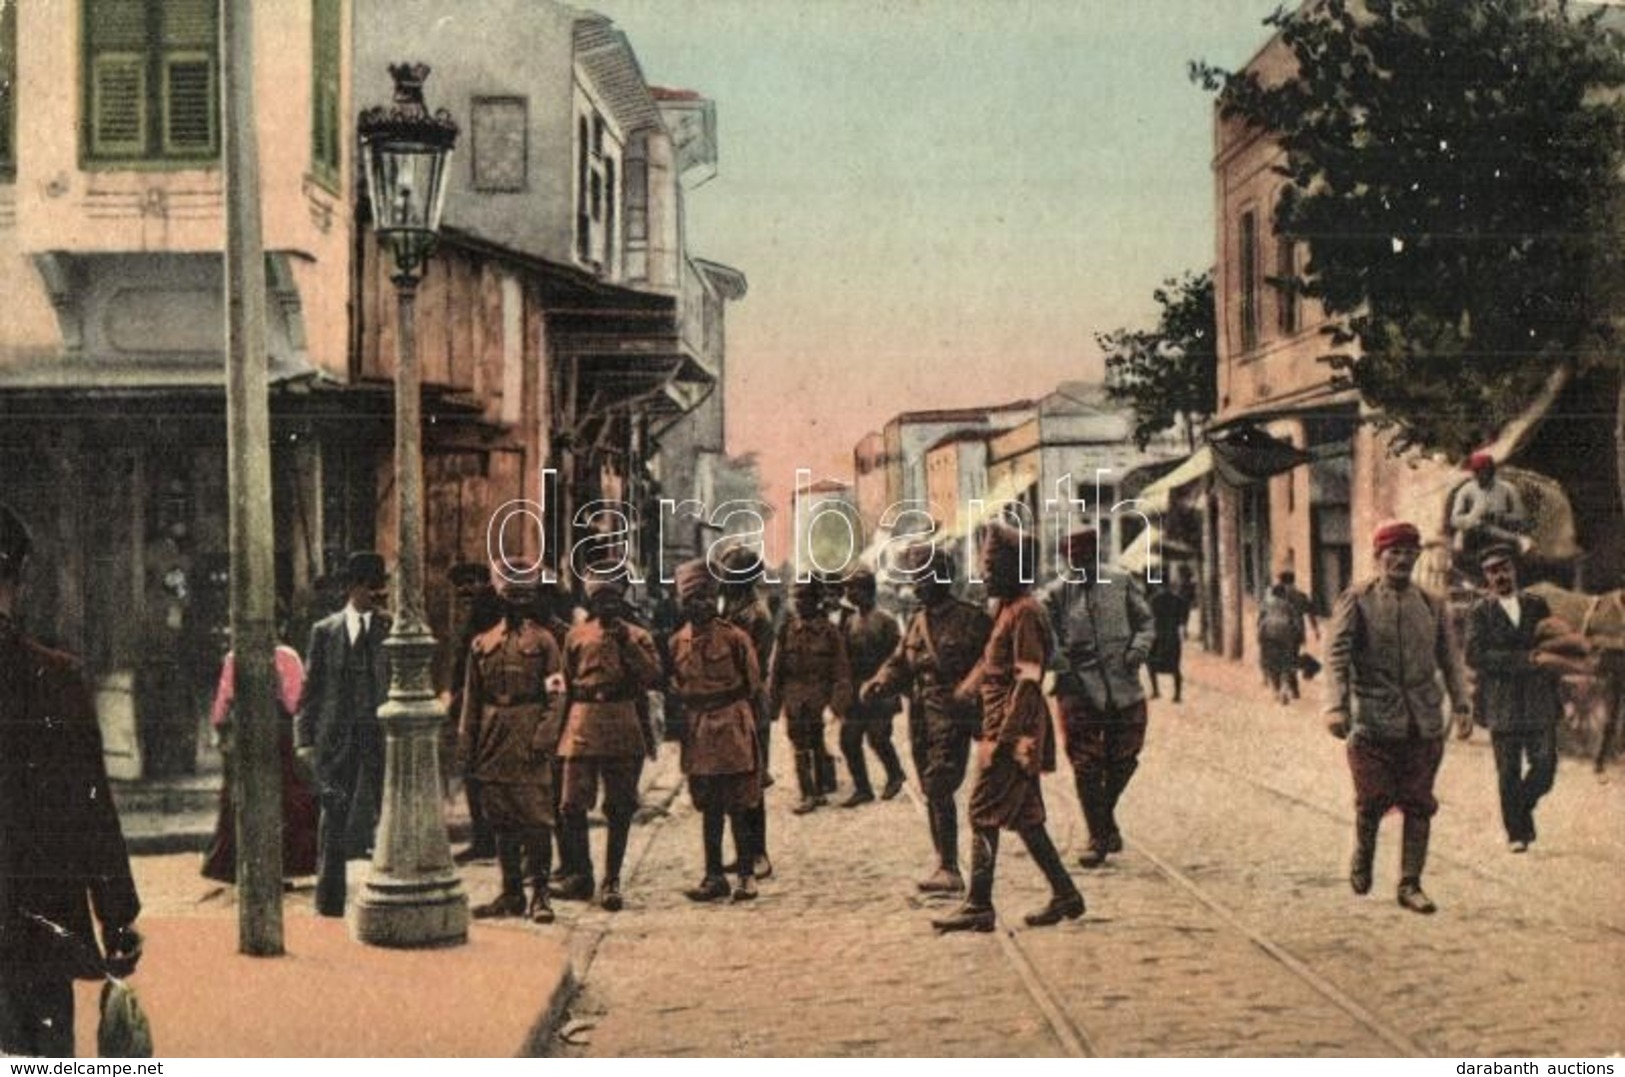 ** T2/T3 Truppe Indiane A Salonicco / Troupes Hindoues A Salonique / Indian Troops At Salonica (Thessaloniki) (EK) - Non Classificati